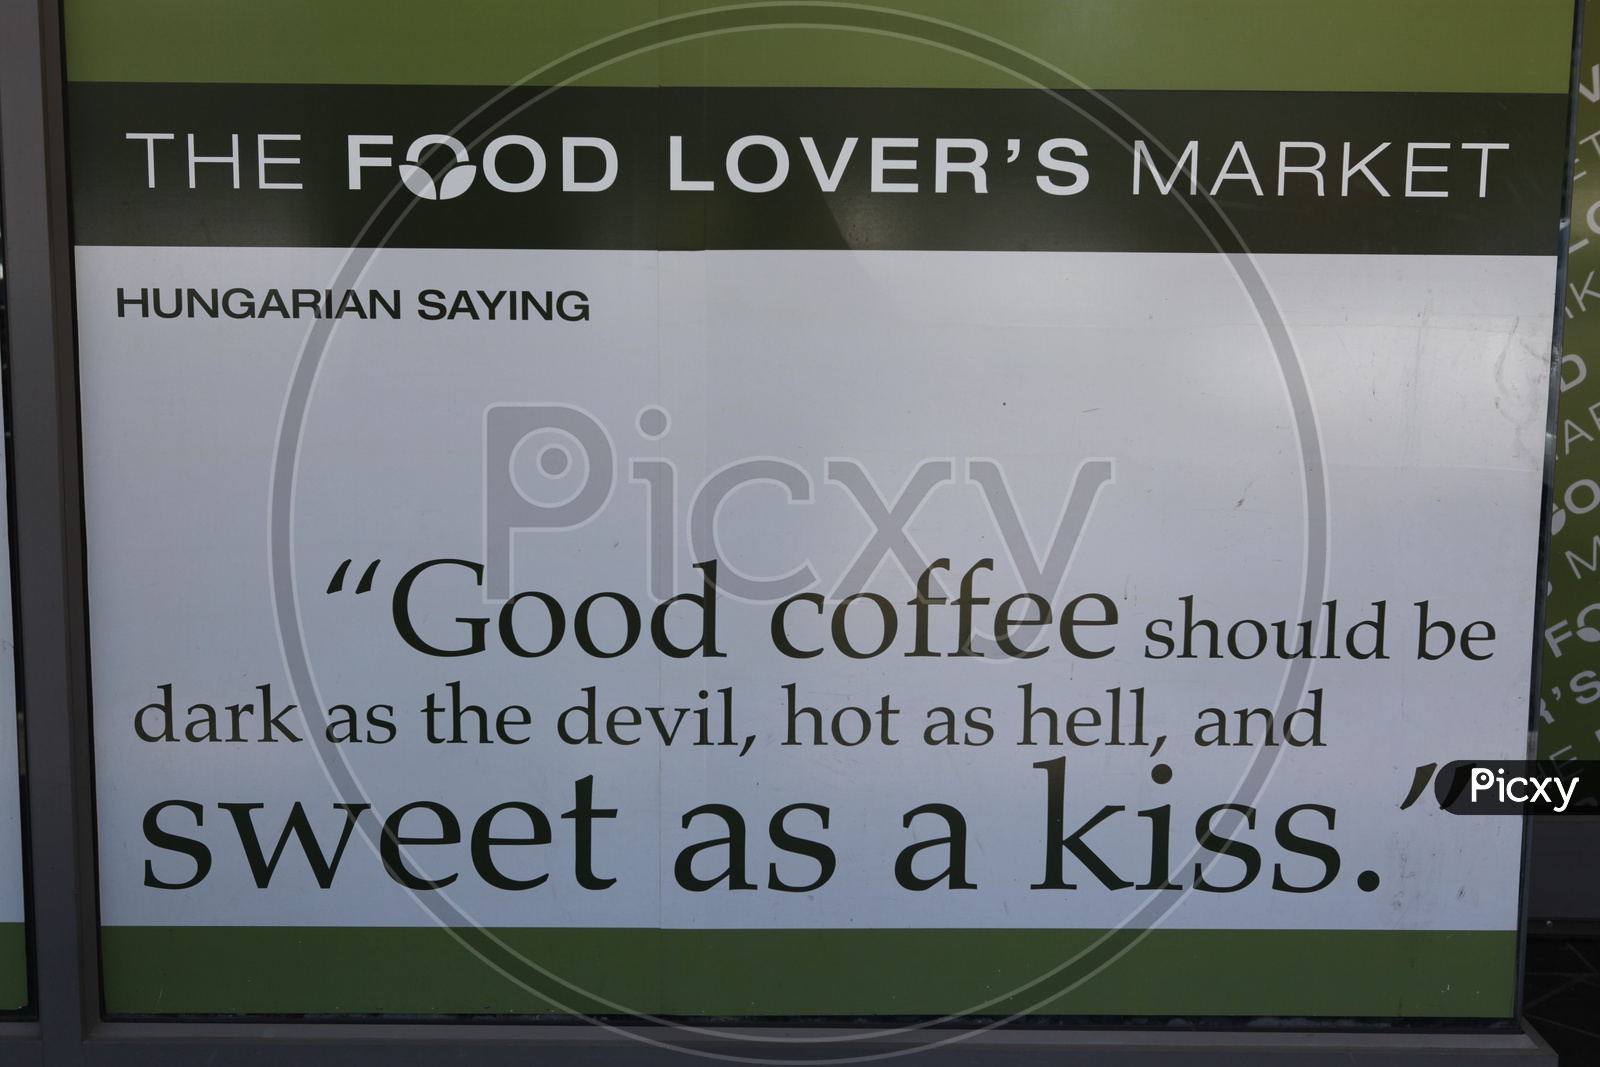 Food Lover's Market welcome board